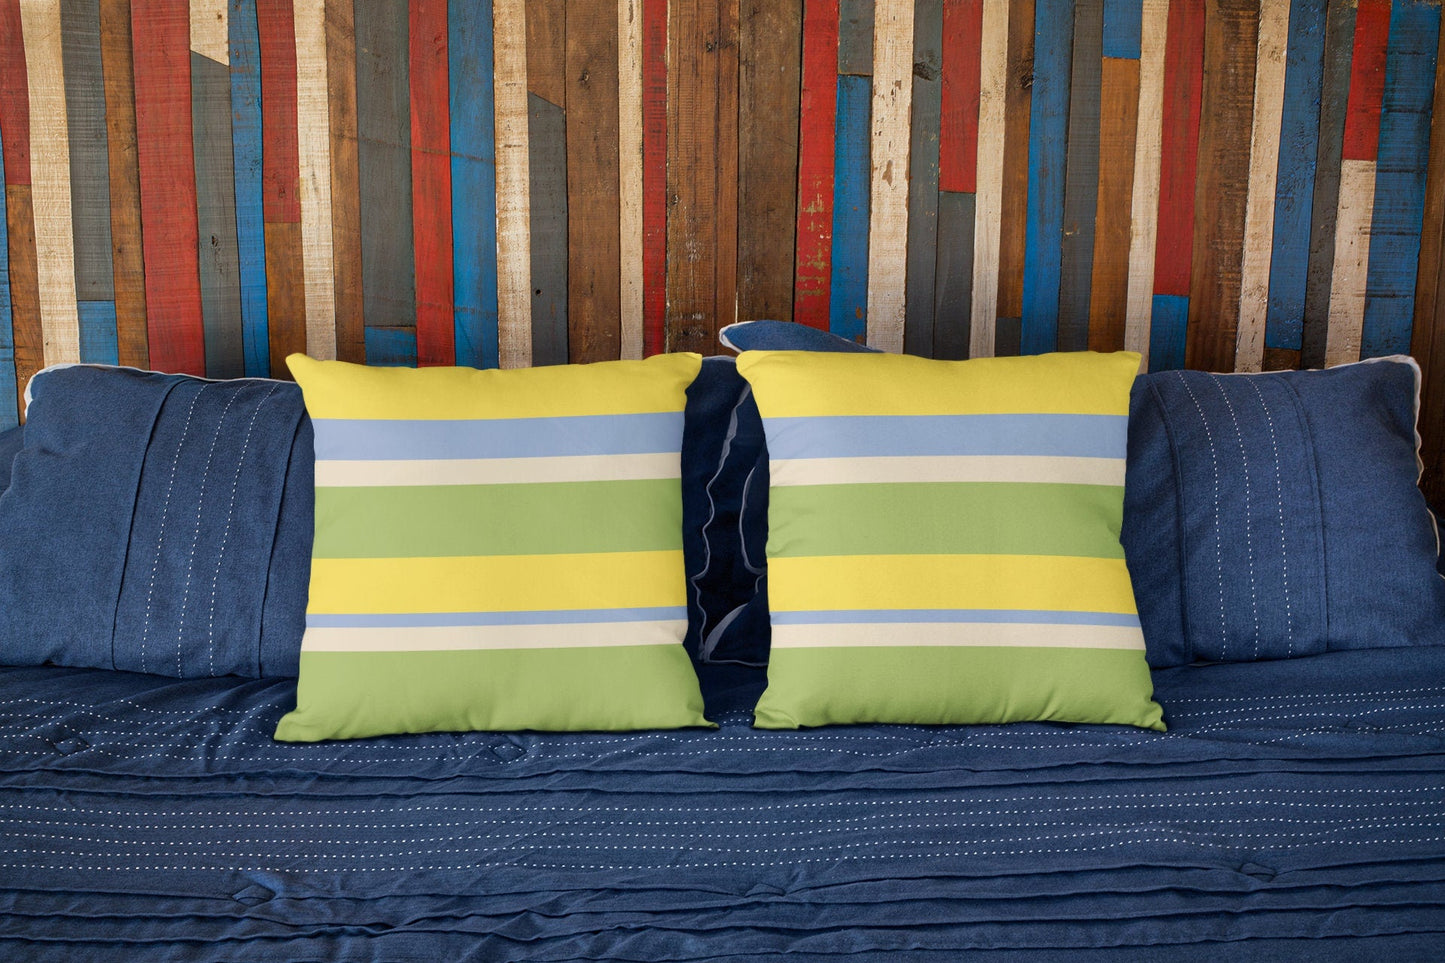 Outdoor Pillow - Green, Yellow and Blue Striped